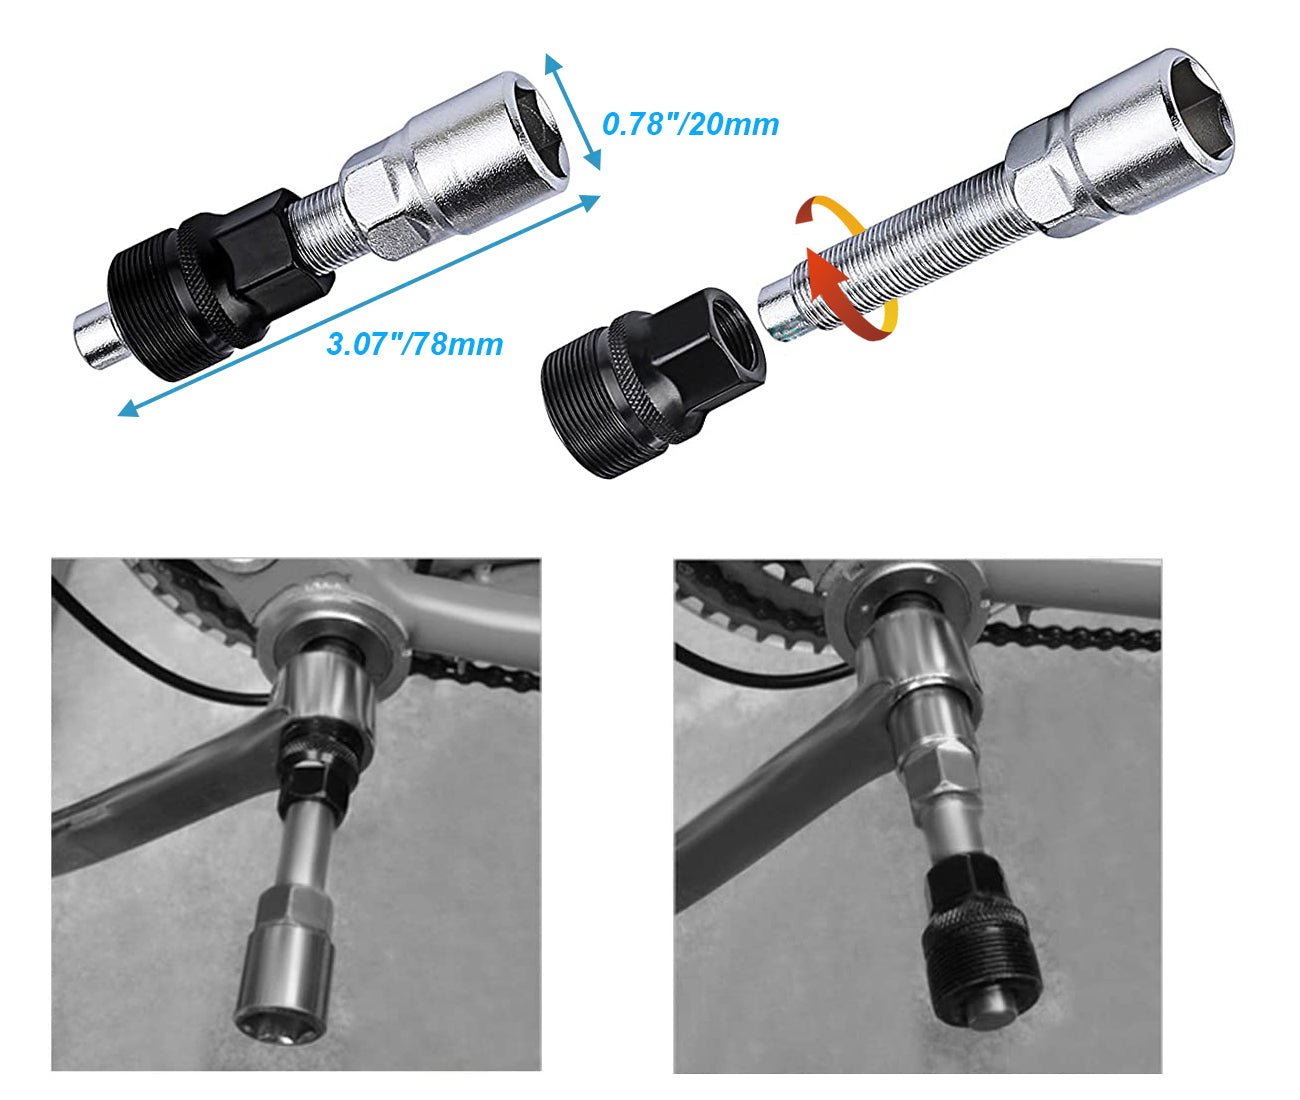 Bicycle Tool Kit Bike Crank Extractor Arm Remover and Bottom Bracket Remover with 16mm Spanner/Wrench